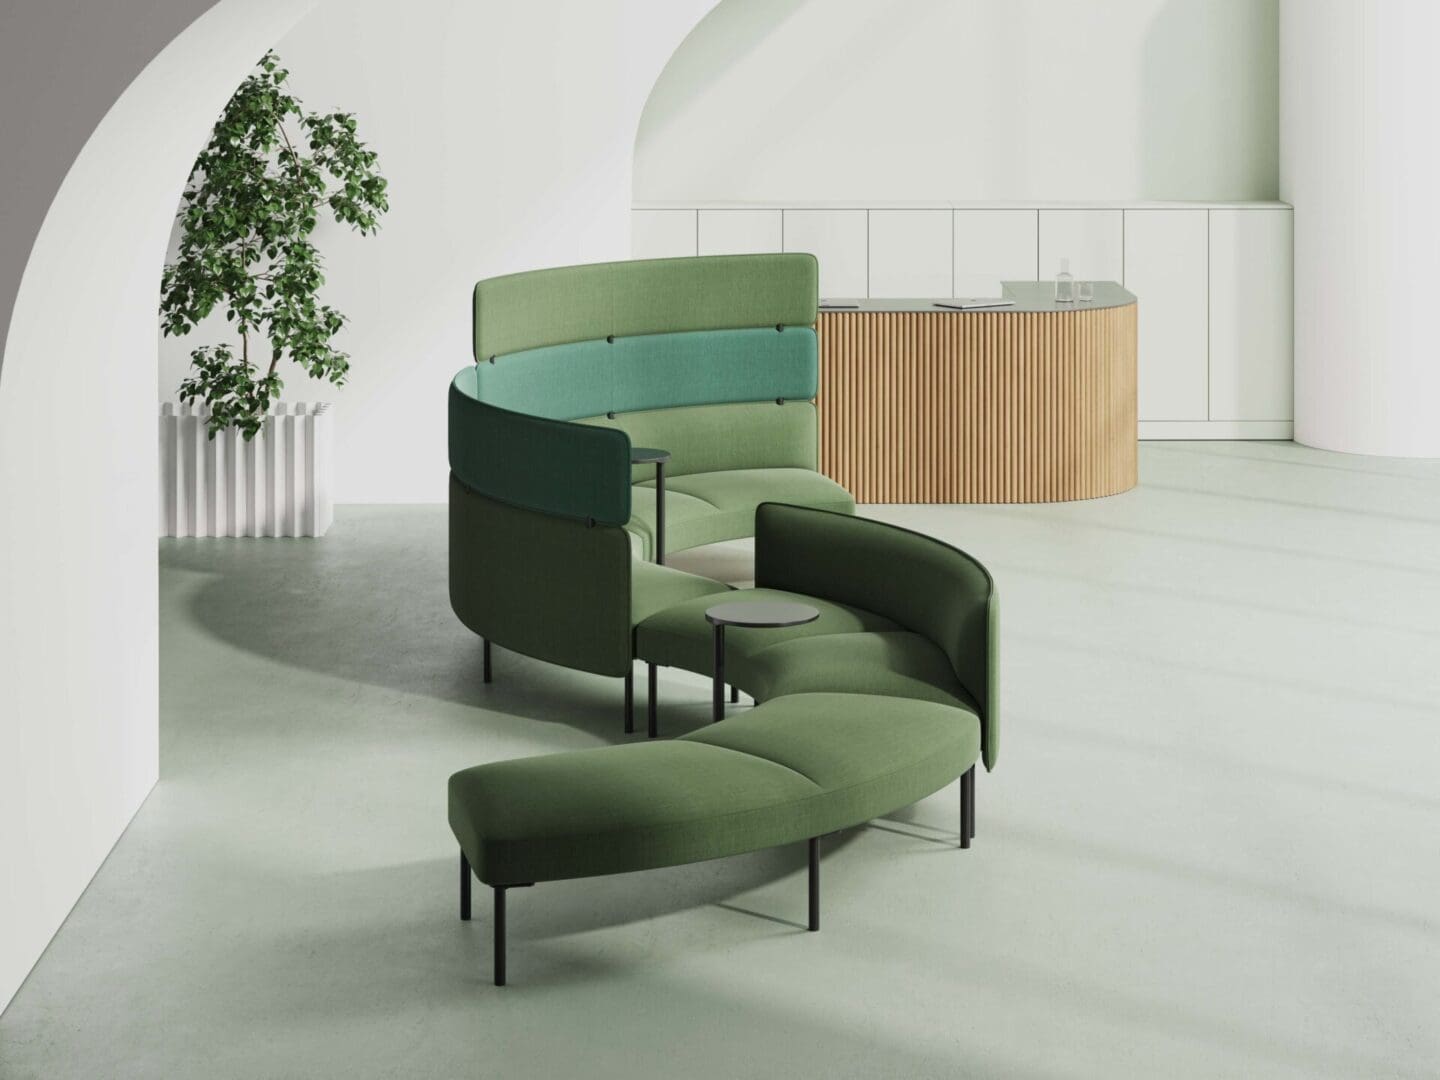 A green chair and ottoman in a room.